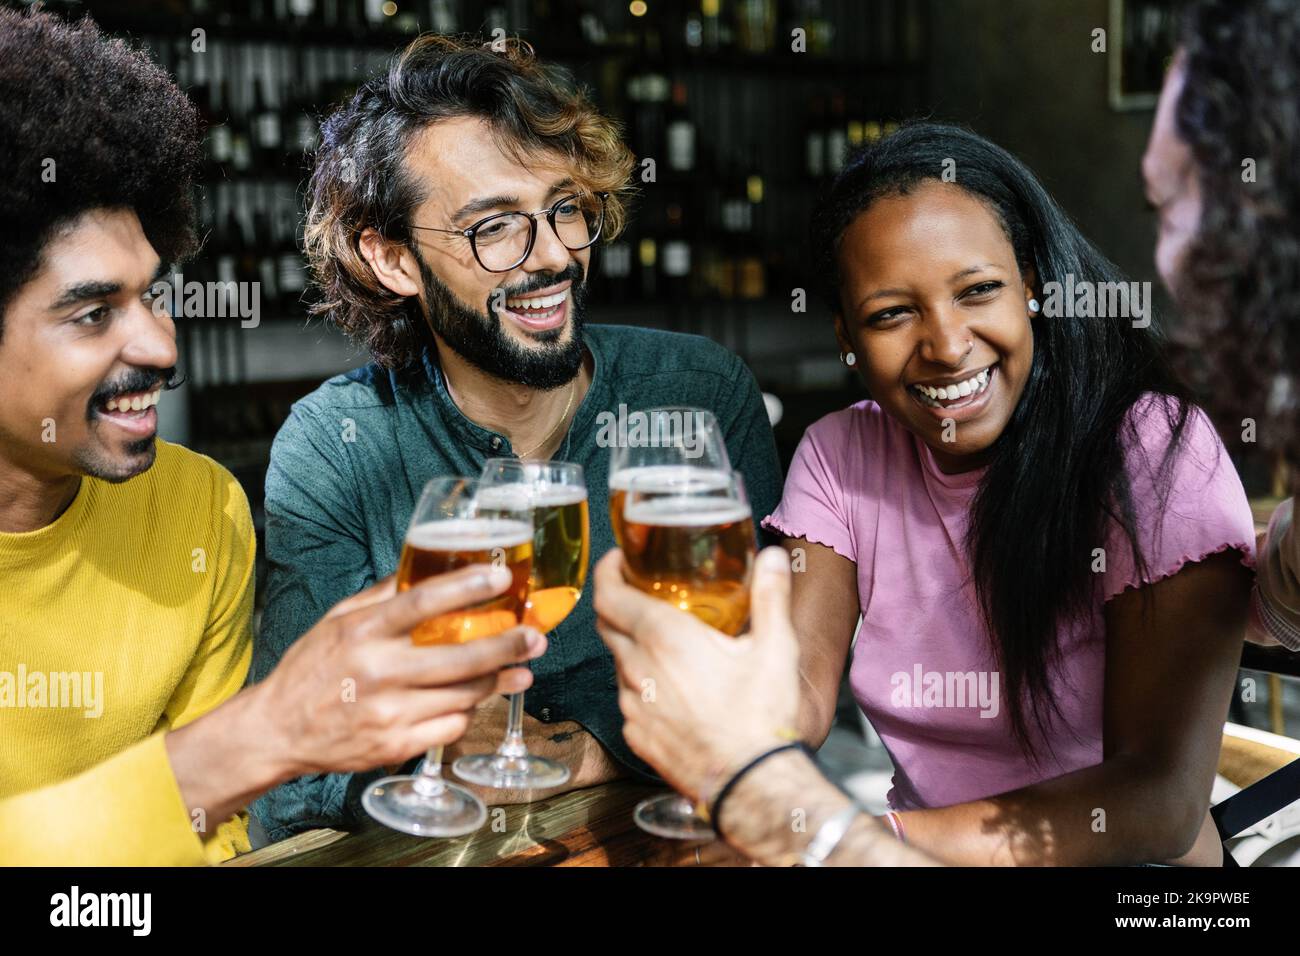 Group of diverse friends enjoying weekend together cheering with beer at bar Stock Photo